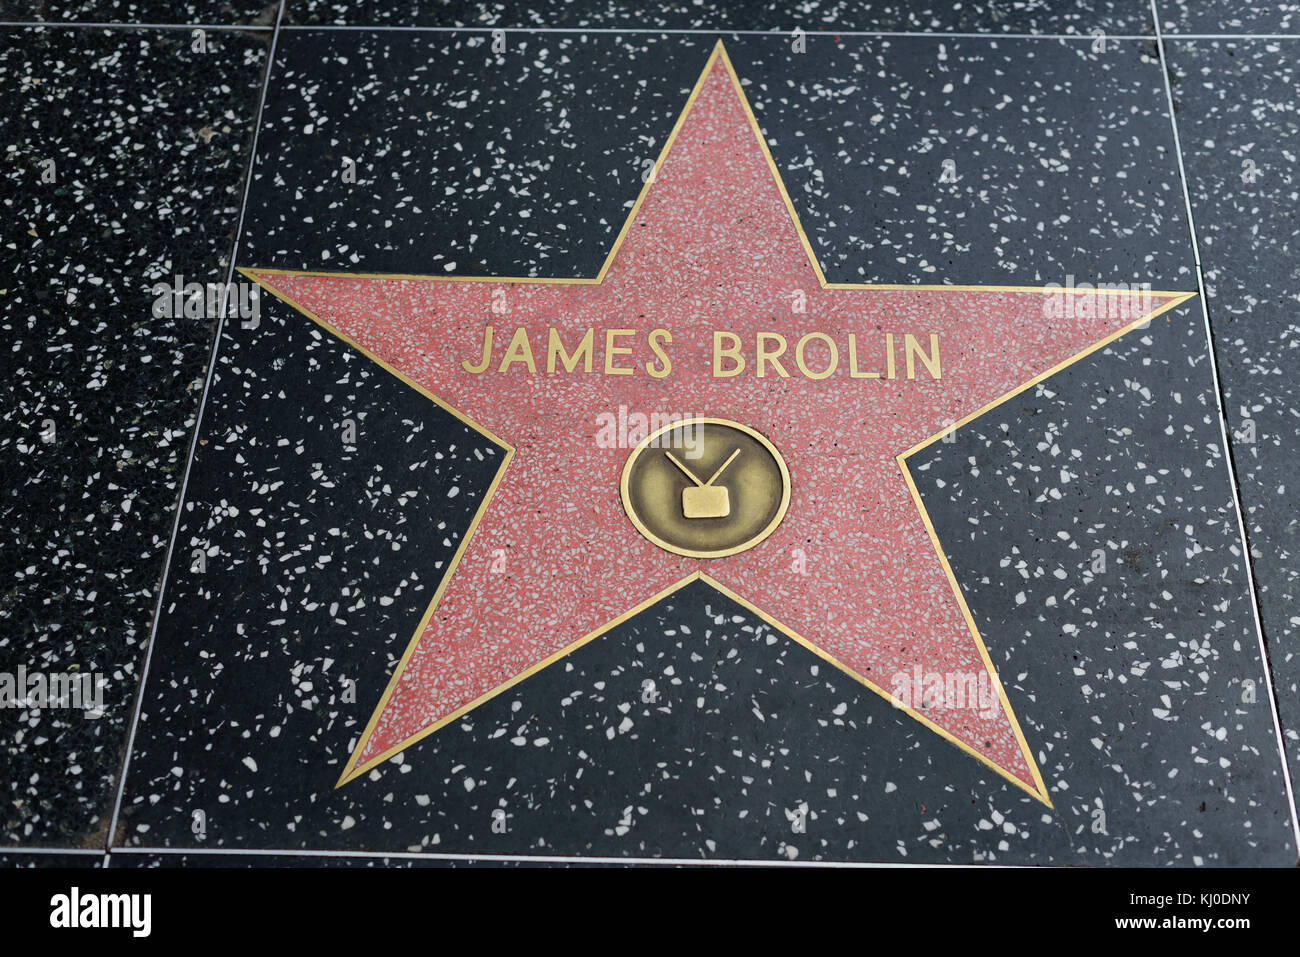 HOLLYWOOD, CA - DECEMBER 06: James Brolin star on the Hollywood Walk of Fame in Hollywood, California on Dec. 6, 2016. Stock Photo